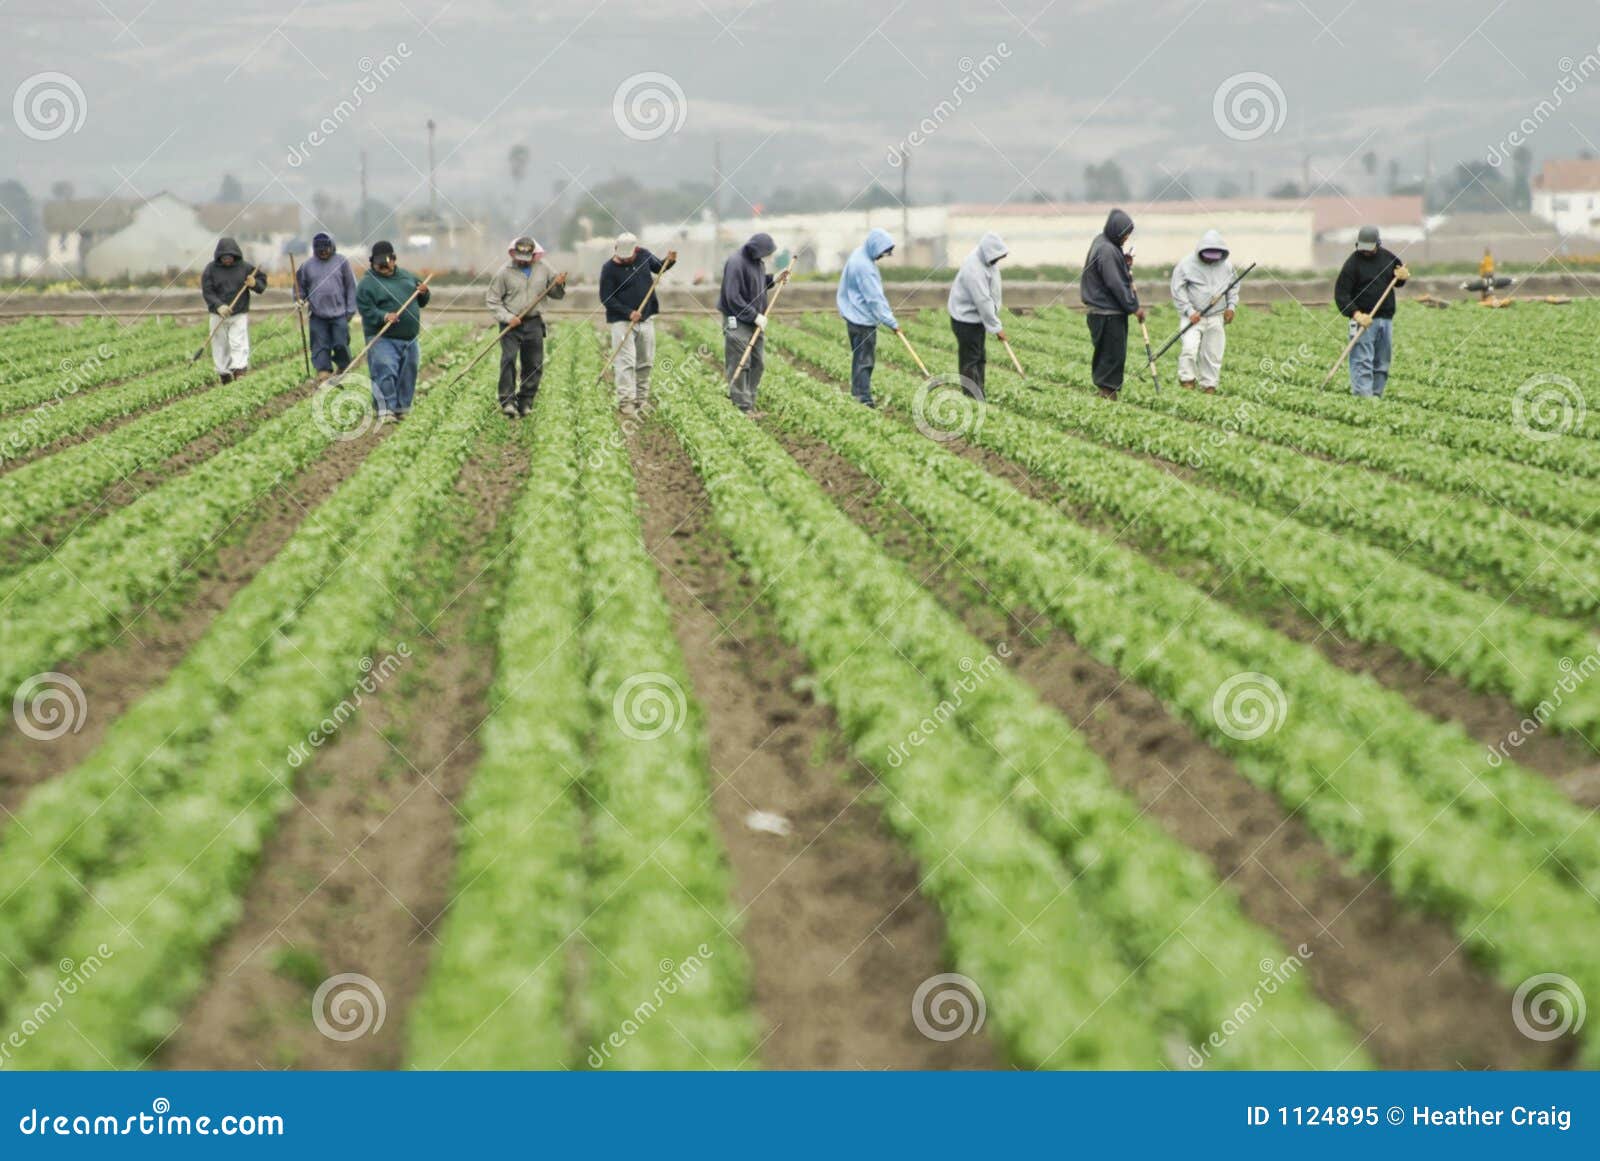 farm workers at work